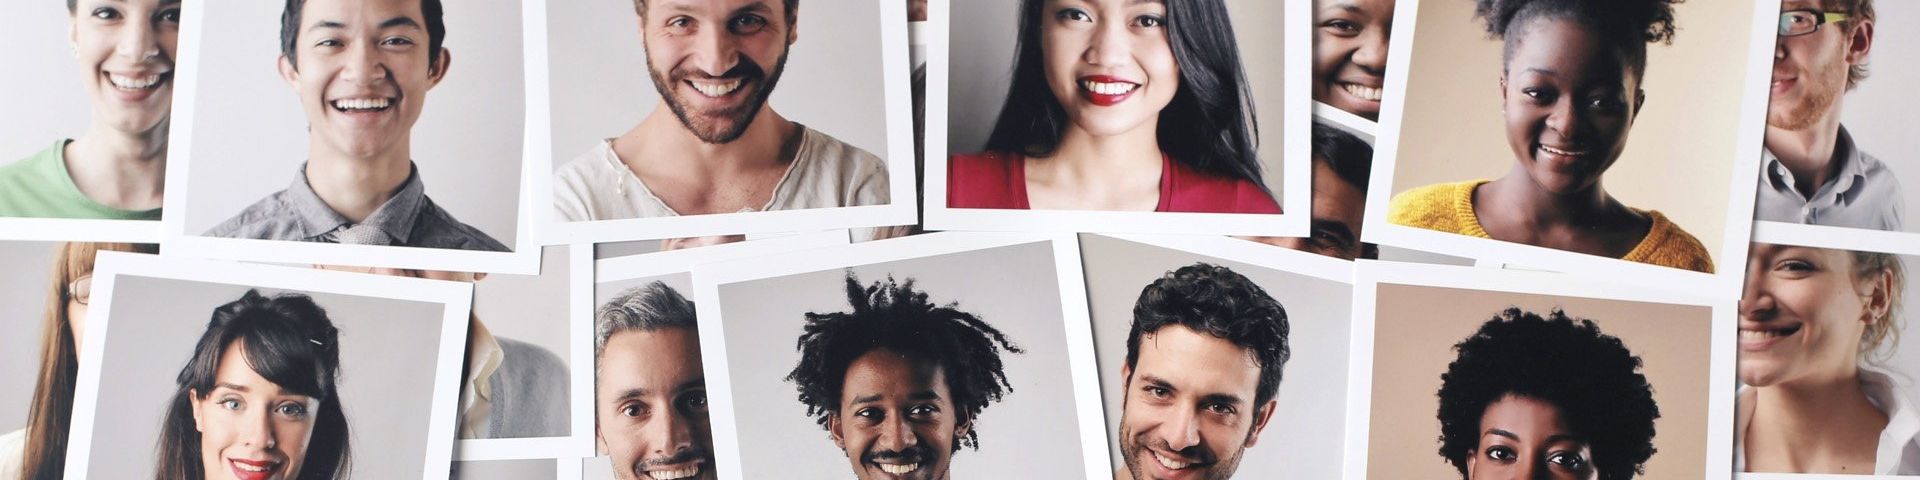 A selection of ‘polaroid’ style photos of smiling young people.